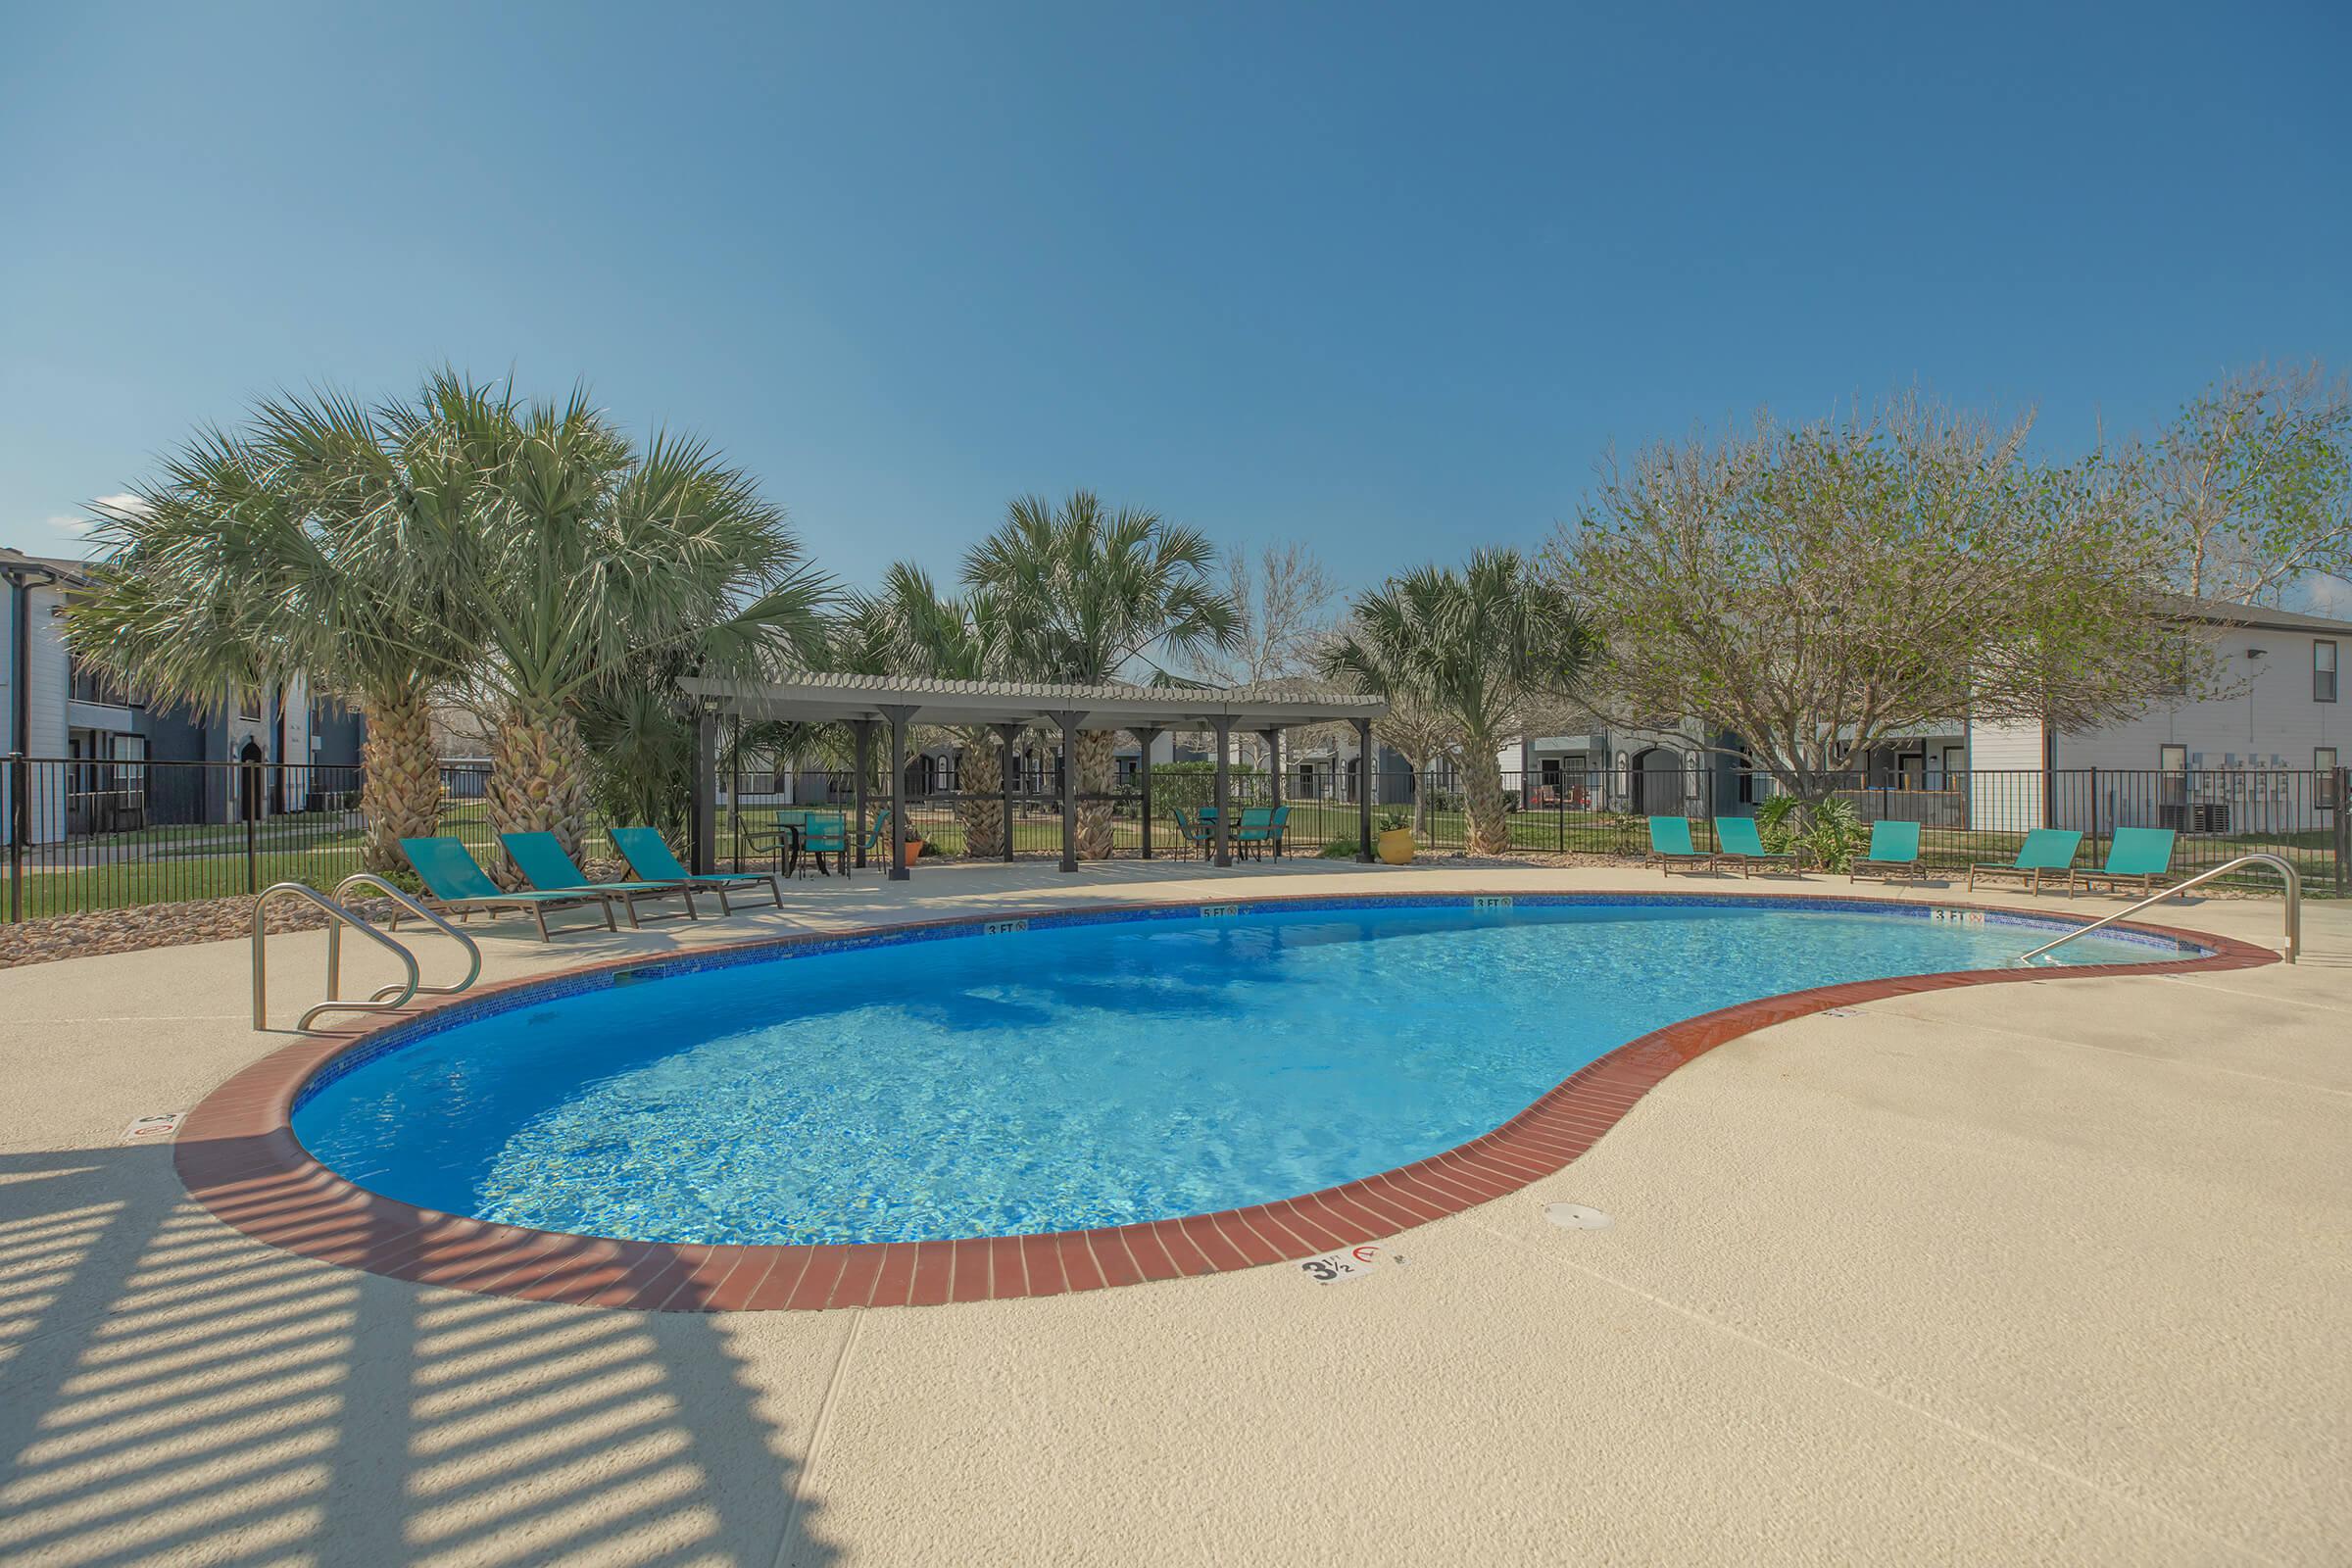 RELAX BESIDE OUR SPARKLING SWIMMING POOL